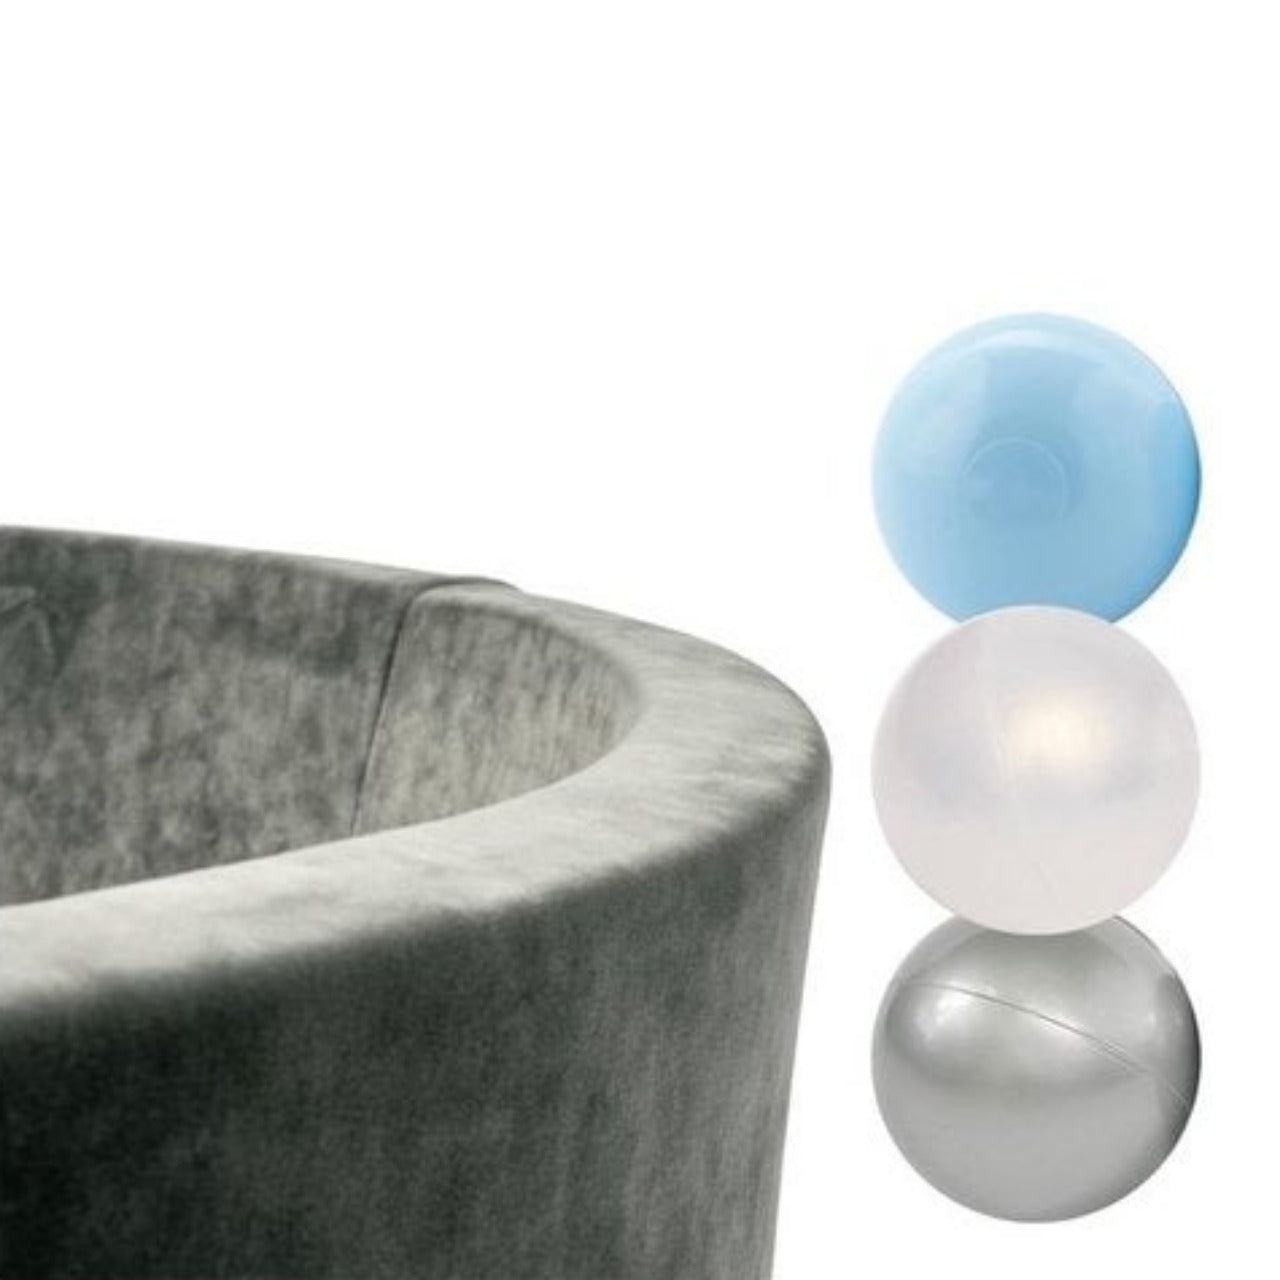 Ball pit Gray round 90x30 (including balls) - Pearl/Silver/Light Blue